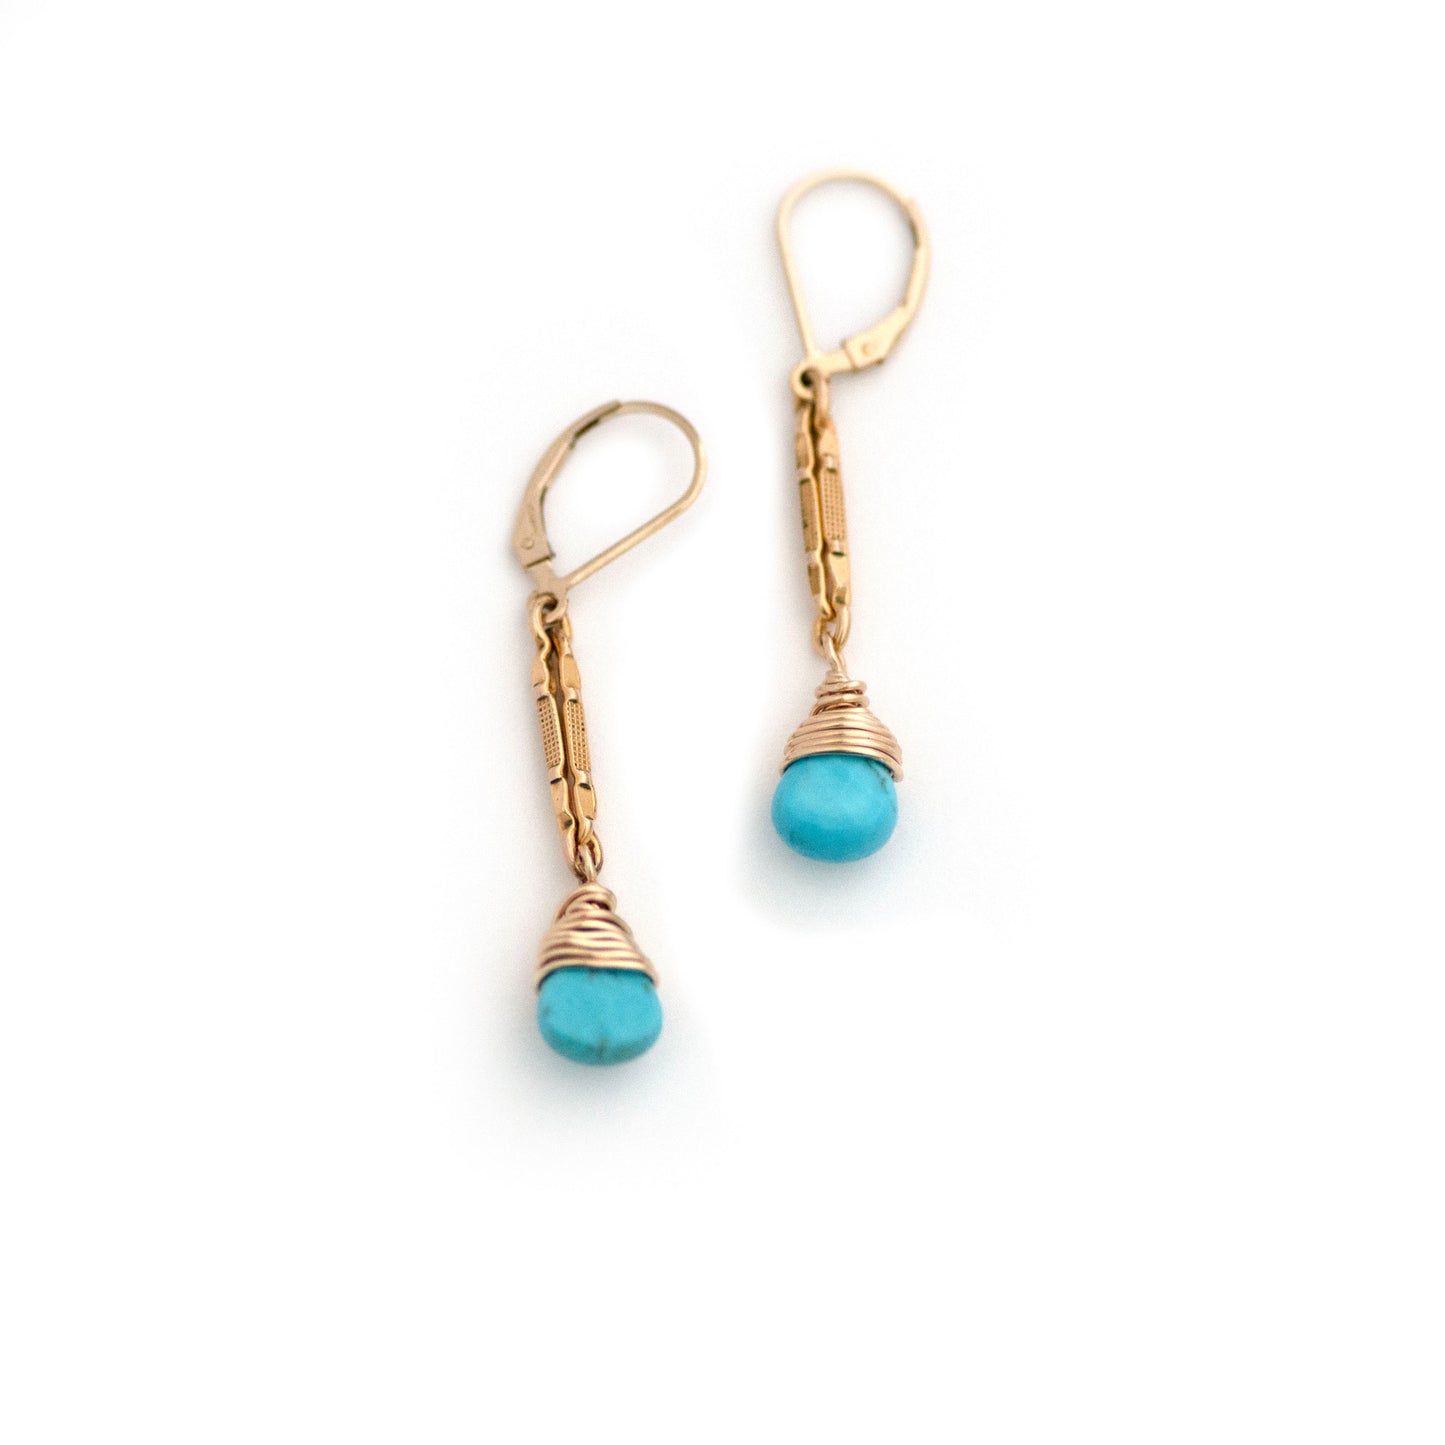 These one-of-a-kind conversion earrings are made up of:  Gold filled antique Victorian watch chain links from the late 1800s with hand tooled details. Arizona turquoise.